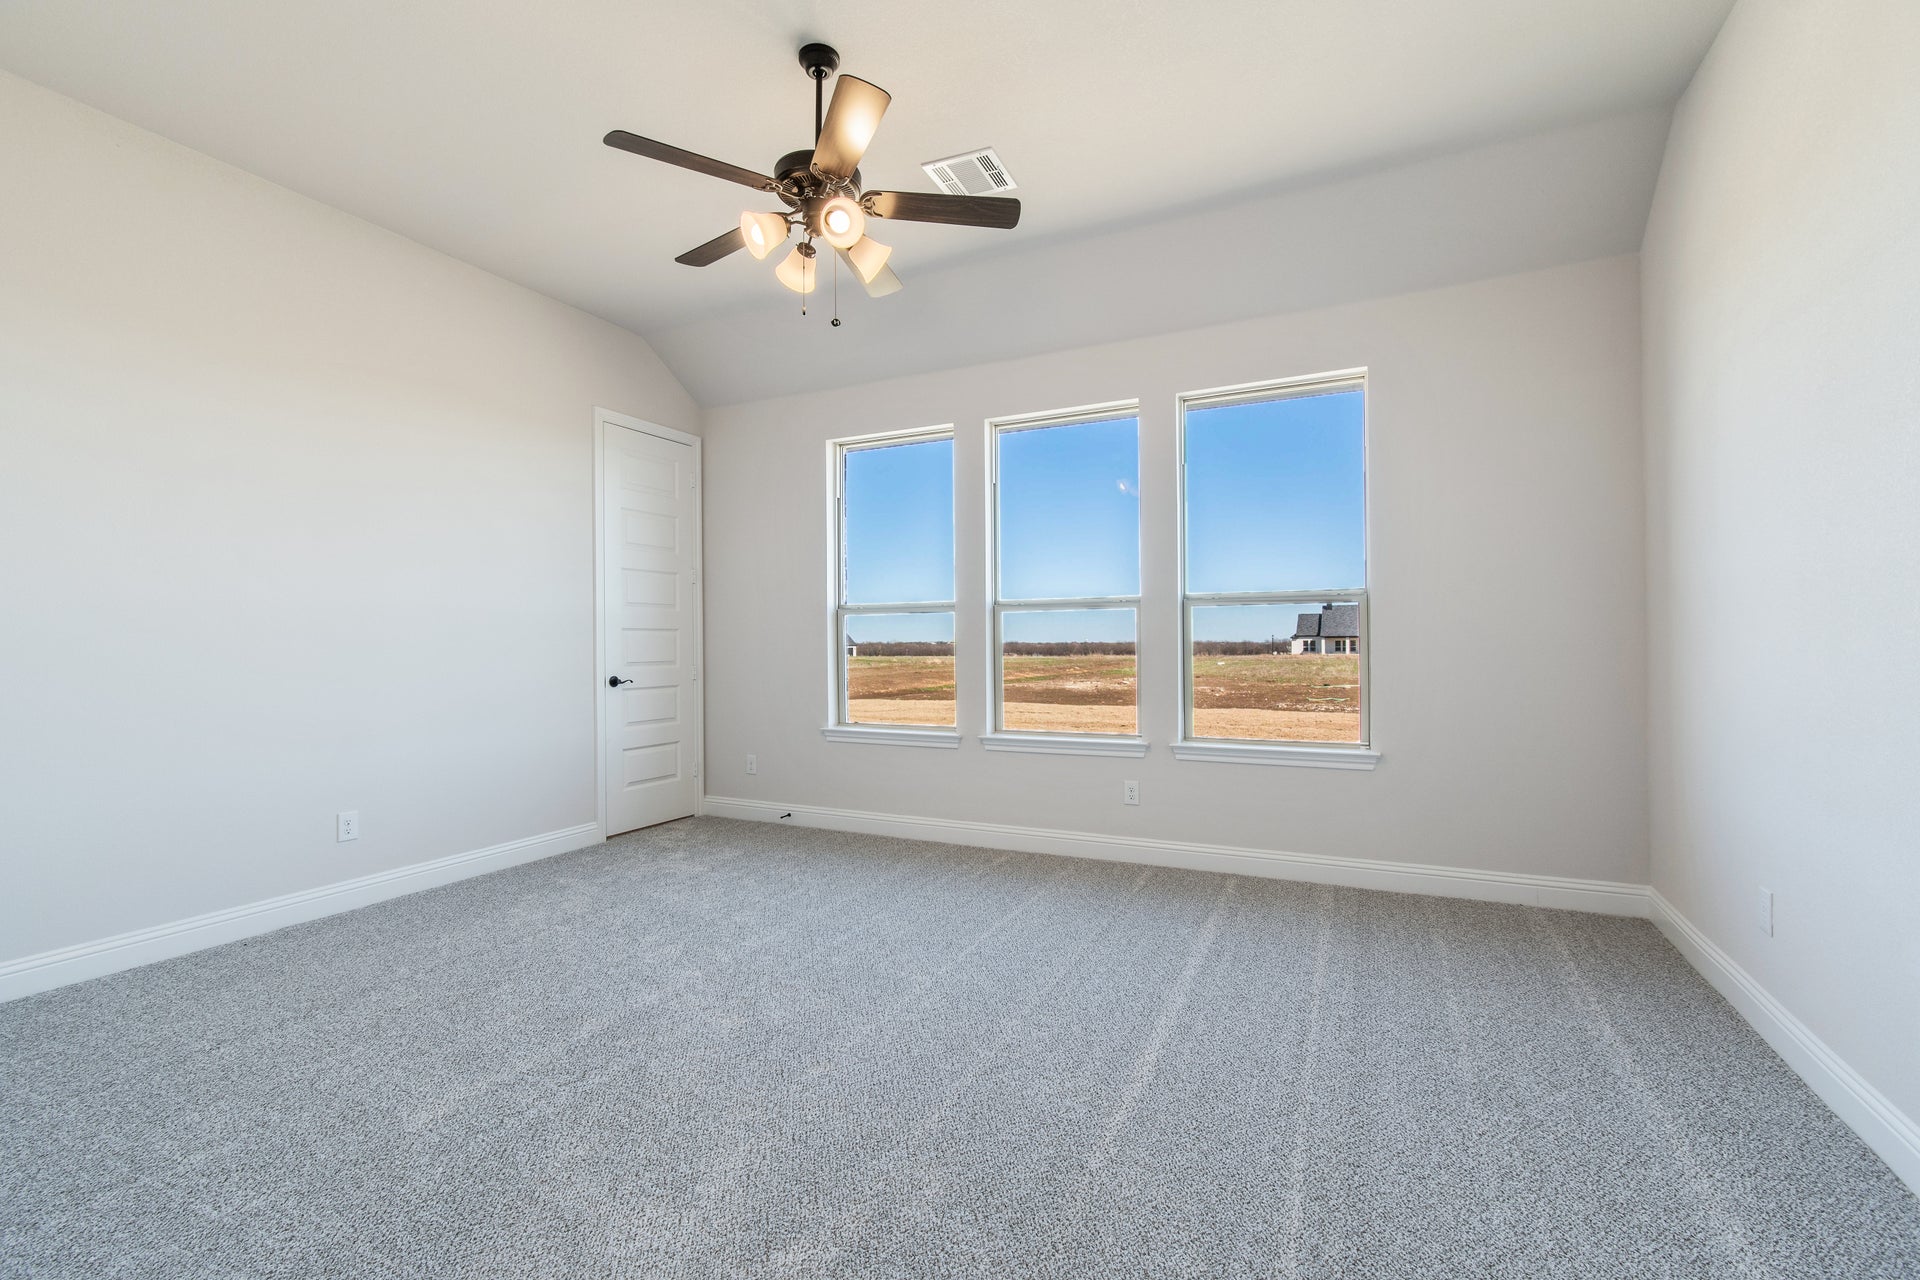 4br New Home in New Fairview, TX